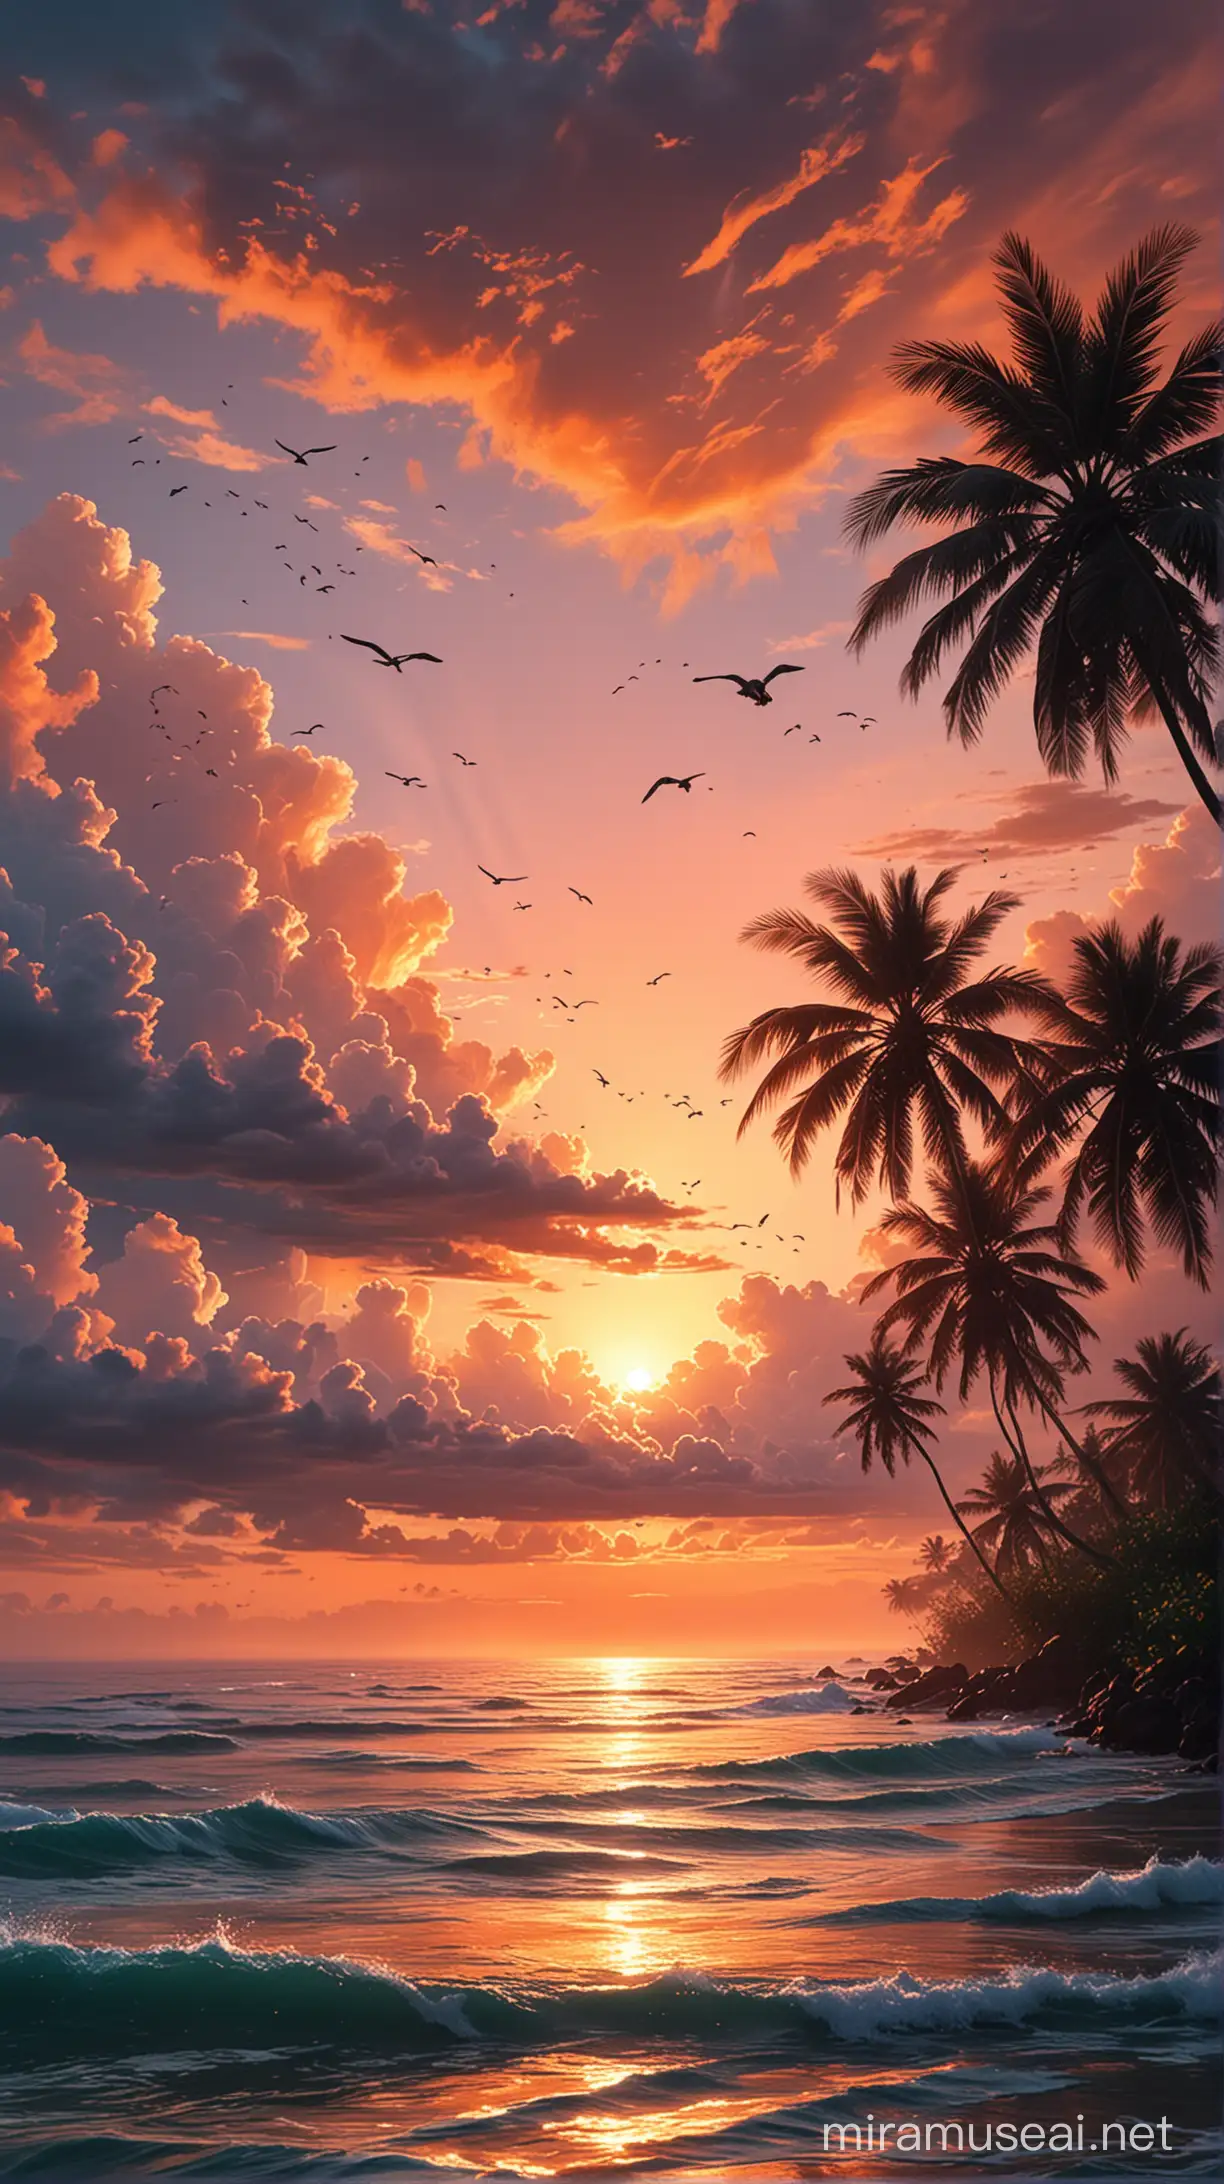 This picturesque scene transports us to a serene tropical paradise during sunset. Here are the vivid details:

Sky:
The sky is a mesmerizing canvas, transitioning from a serene teal hue at the top to a fiery deep orange near the horizon. Wispy clouds catch the last rays of sunlight, their edges aglow.
Sun:
The sun, partially visible, rests just above the horizon. Its warm glow illuminates the entire scene, casting a magical ambiance.
Clouds:
Fluffy clouds, like cotton candy, drift across the sky. Their forms catch the fading light, creating a dreamlike effect.
Vegetation:
Dark silhouettes of tropical trees and lush foliage frame the image. Palm trees, with intricate fronds, stand tall against the horizon.
Birds:
A flock of birds gracefully glides across the sky, their silhouettes adding movement and life to the tranquil moment.
Water:
The calm sea mirrors the sky’s colors—a gradient from deep blue to warm orange. Reflections dance upon the water’s surface., illustration